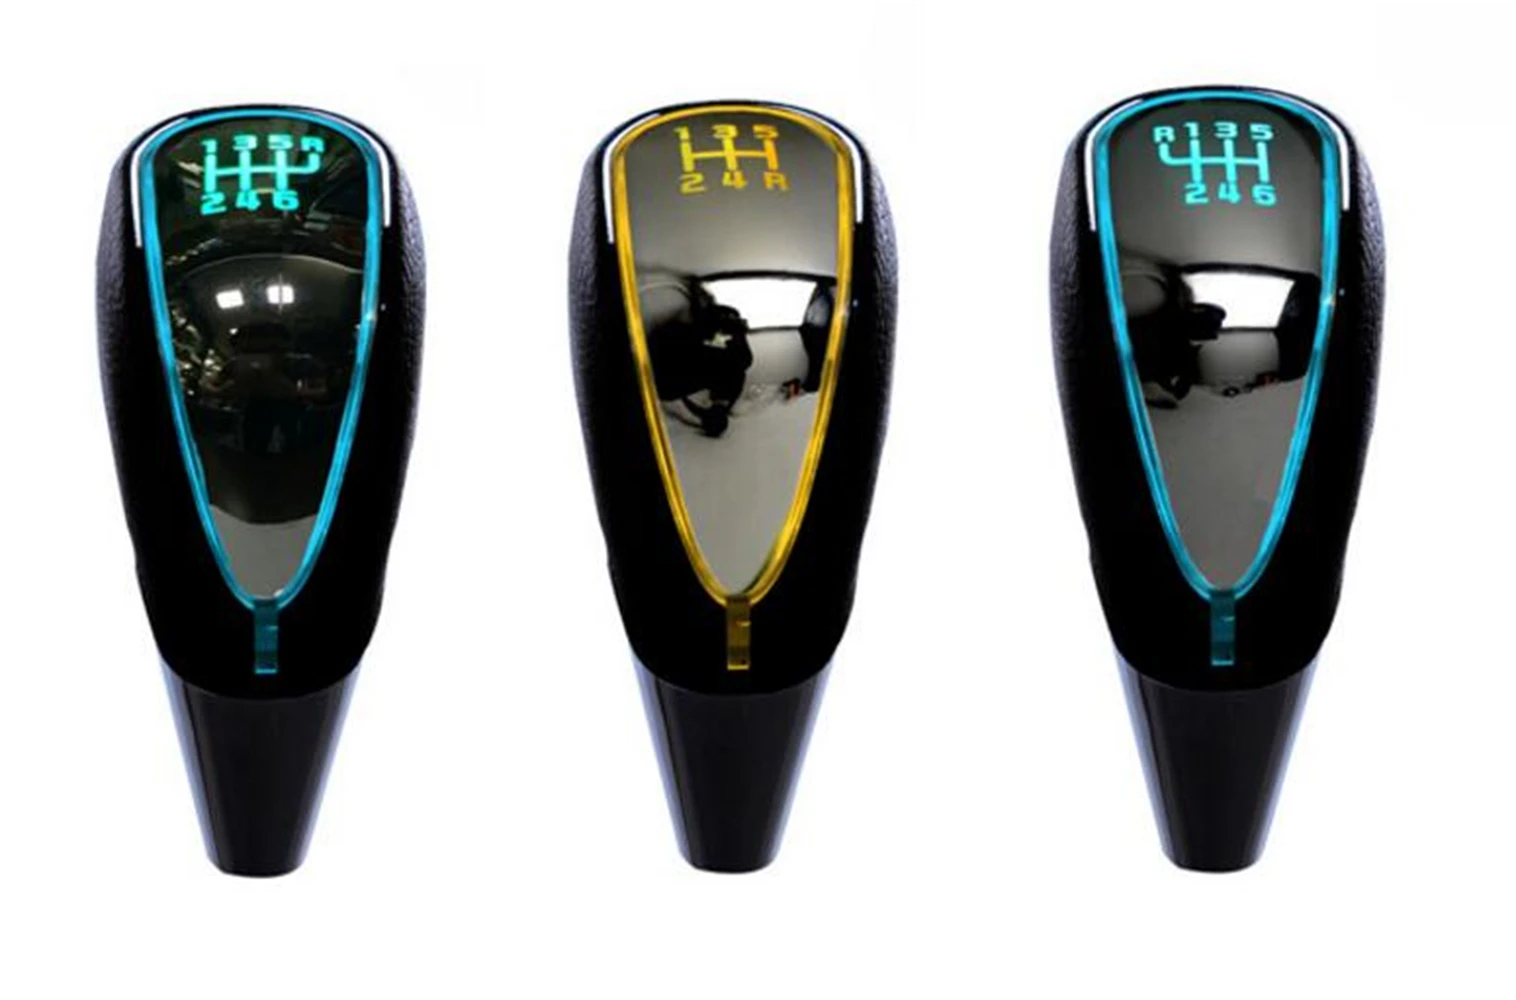 

7 colors changes Activated Gear Shift Knob 5 6 Speed Car Logo LED Gear Handball Knob Light Cigarette Lighter Charger